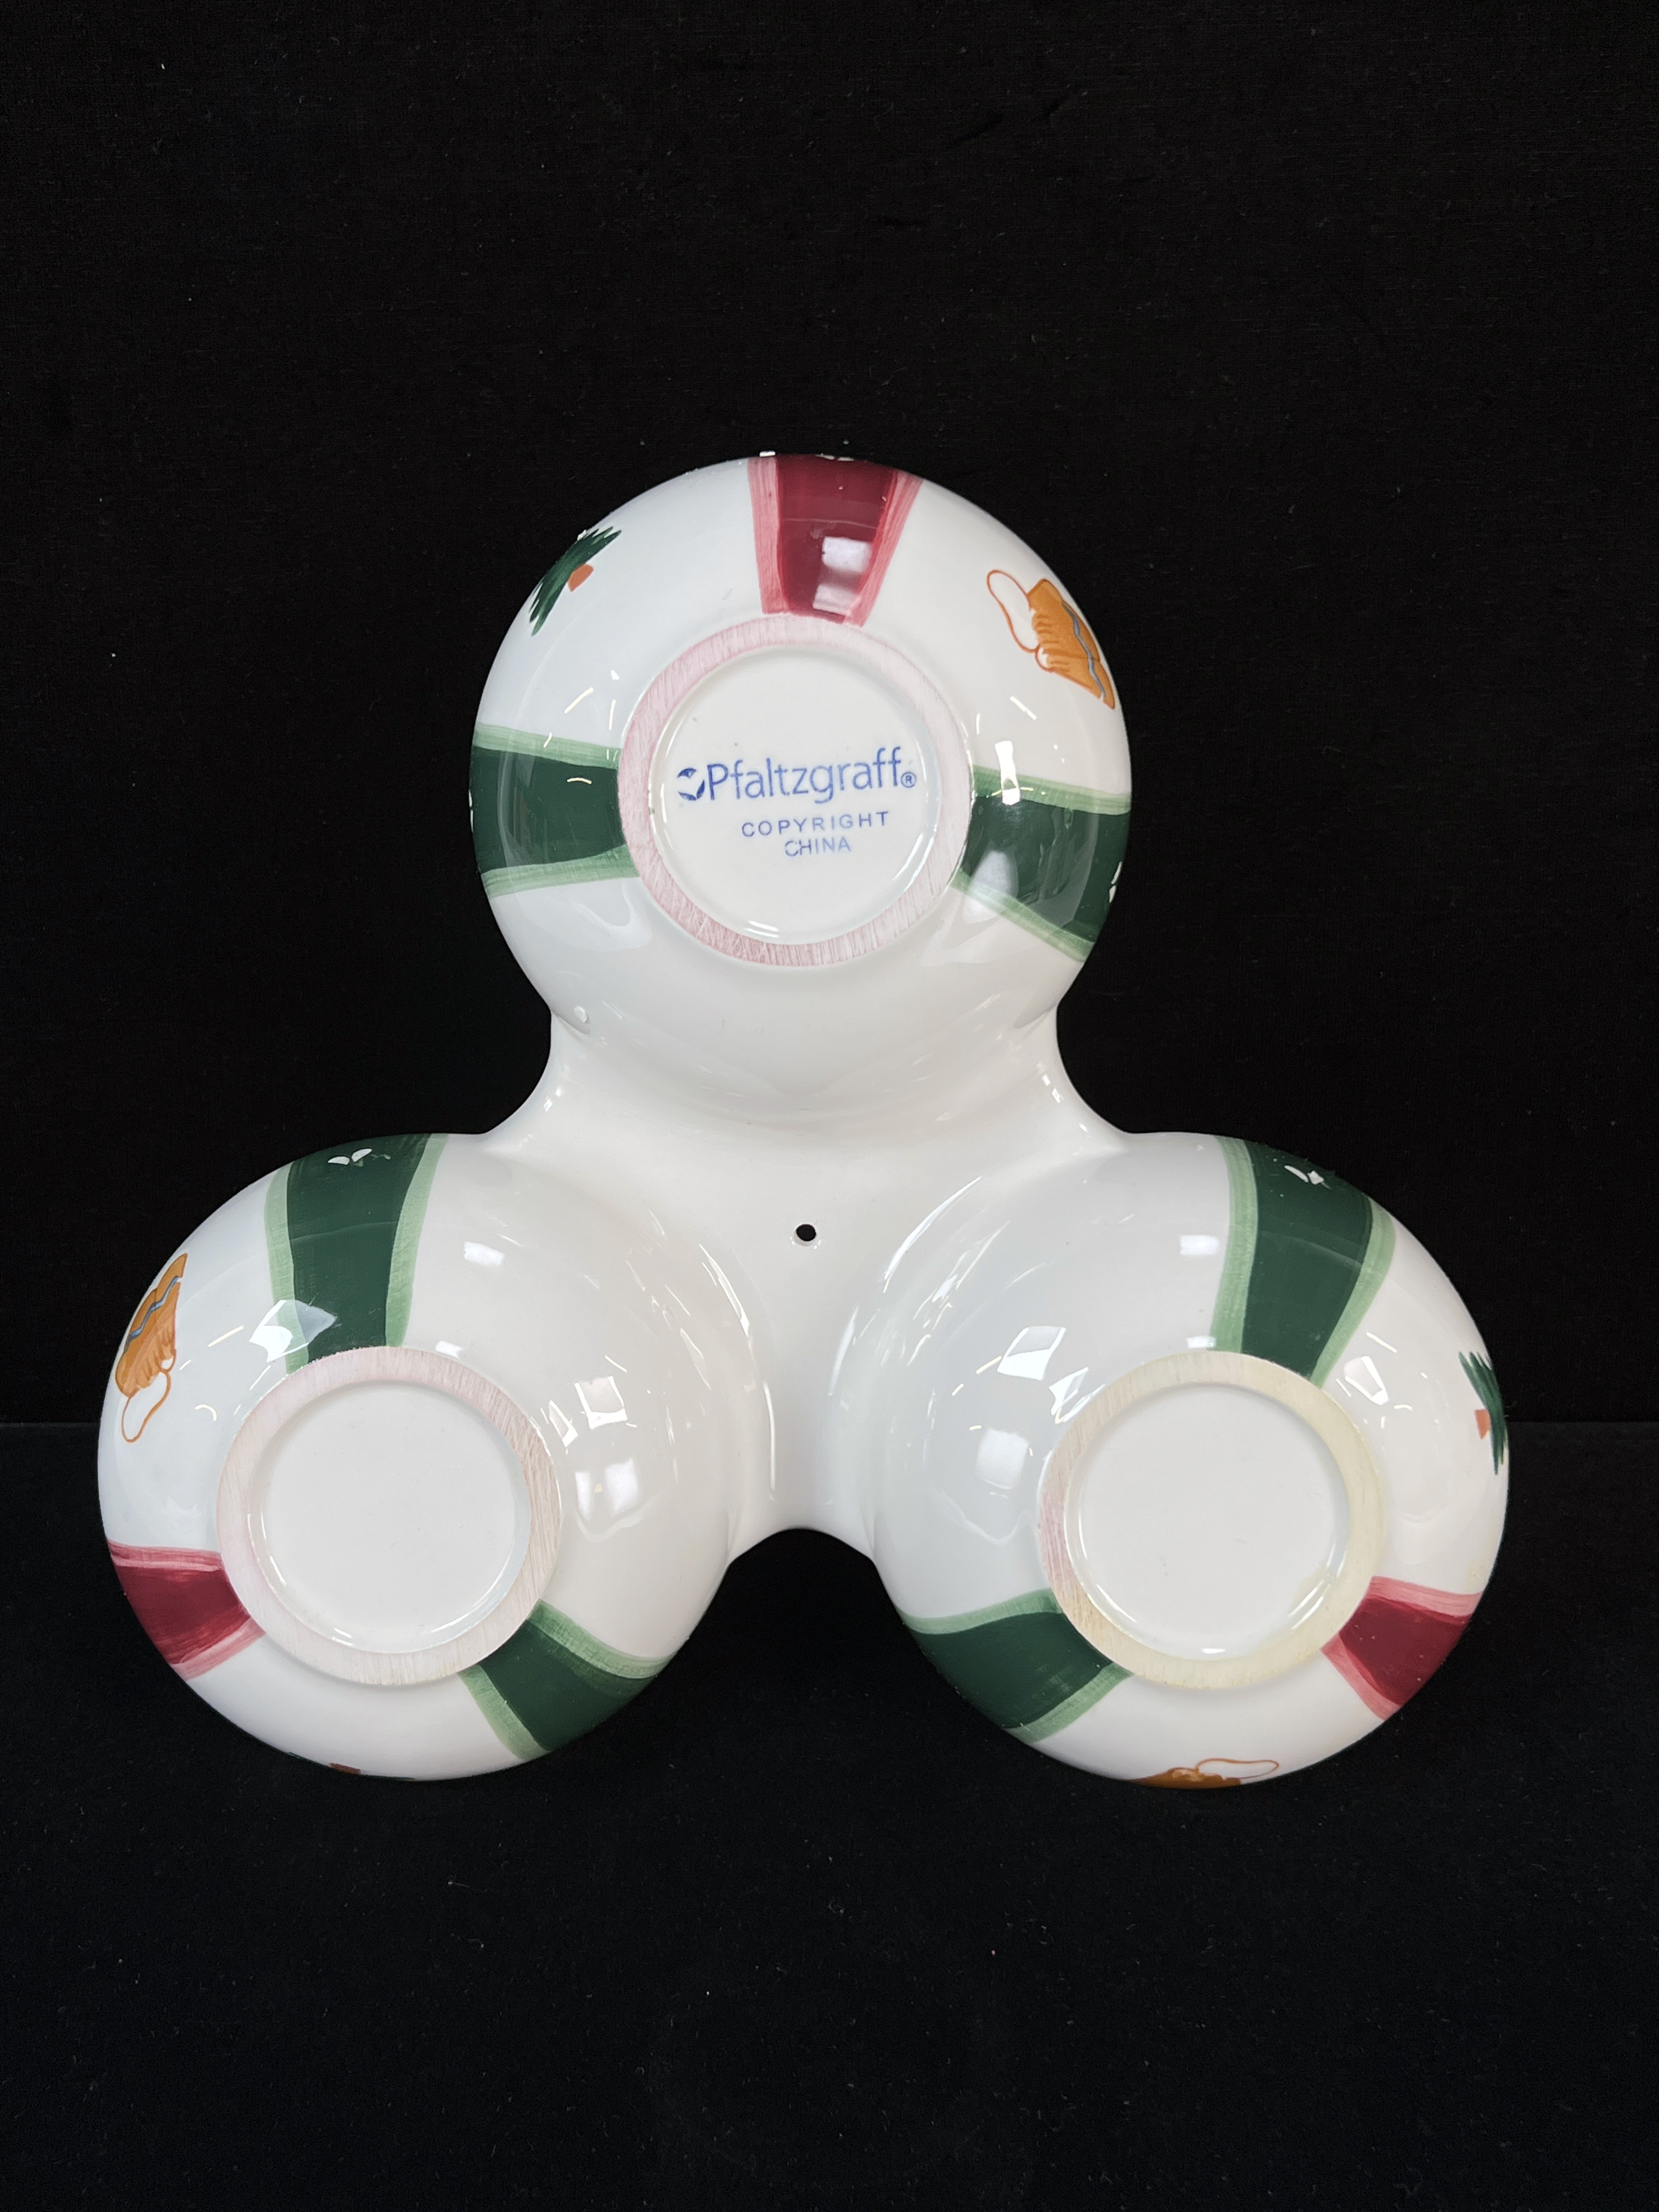 Pfaltzgraff Divided Holiday Serving Dish In Box image 2